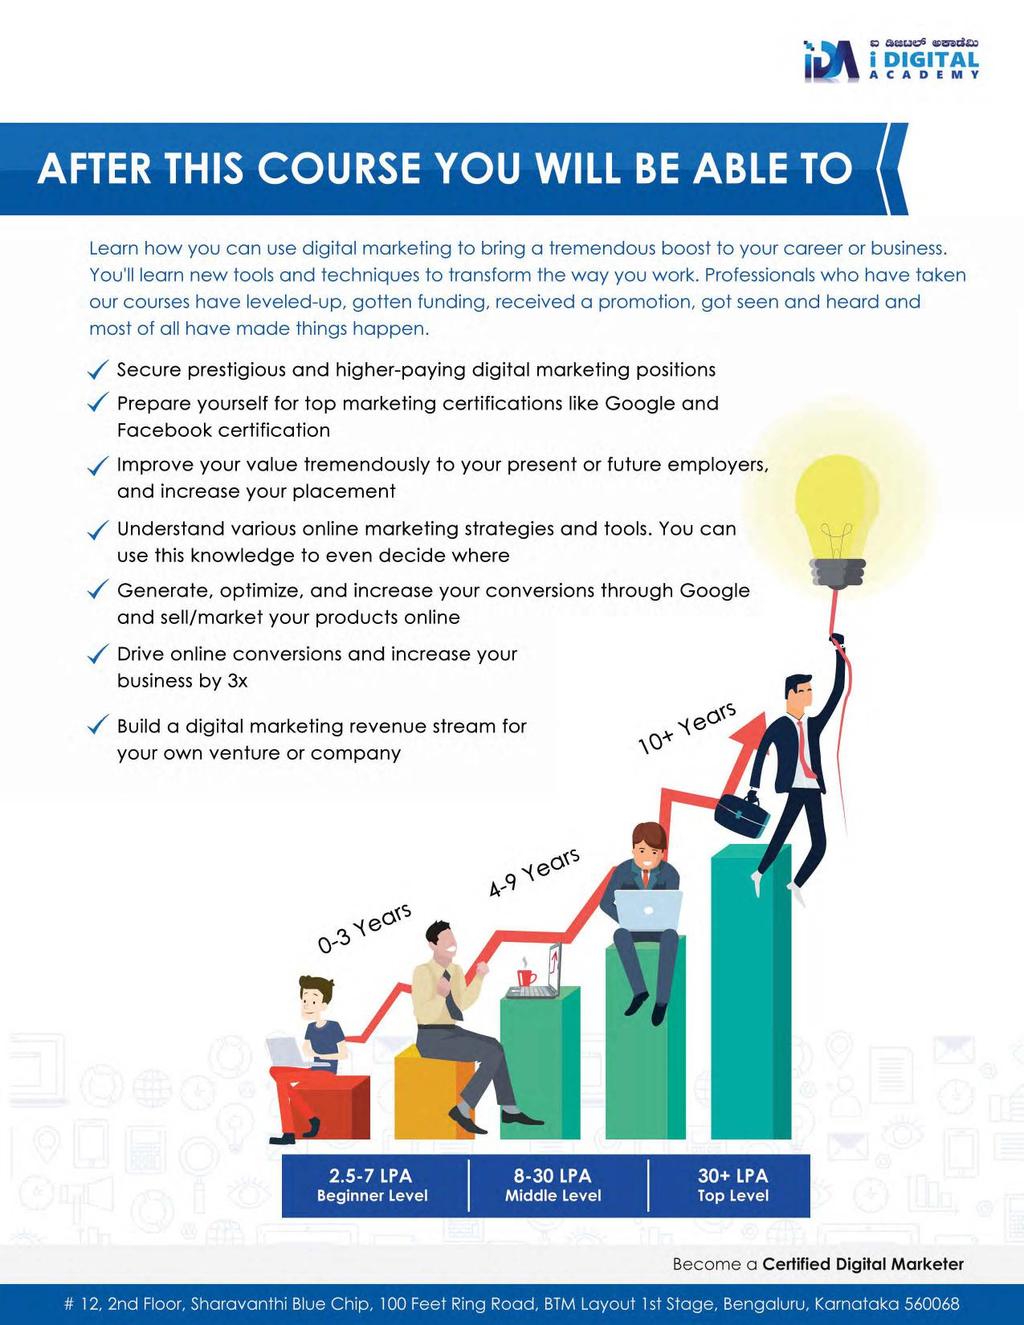 5:;.:»eeue;,5 <1Pi5ild~ AFTER THIS COURSE YOU WILL BE ABLE TO I Learn how you can use digital marketing to bring a tremendous boost to your career or business.